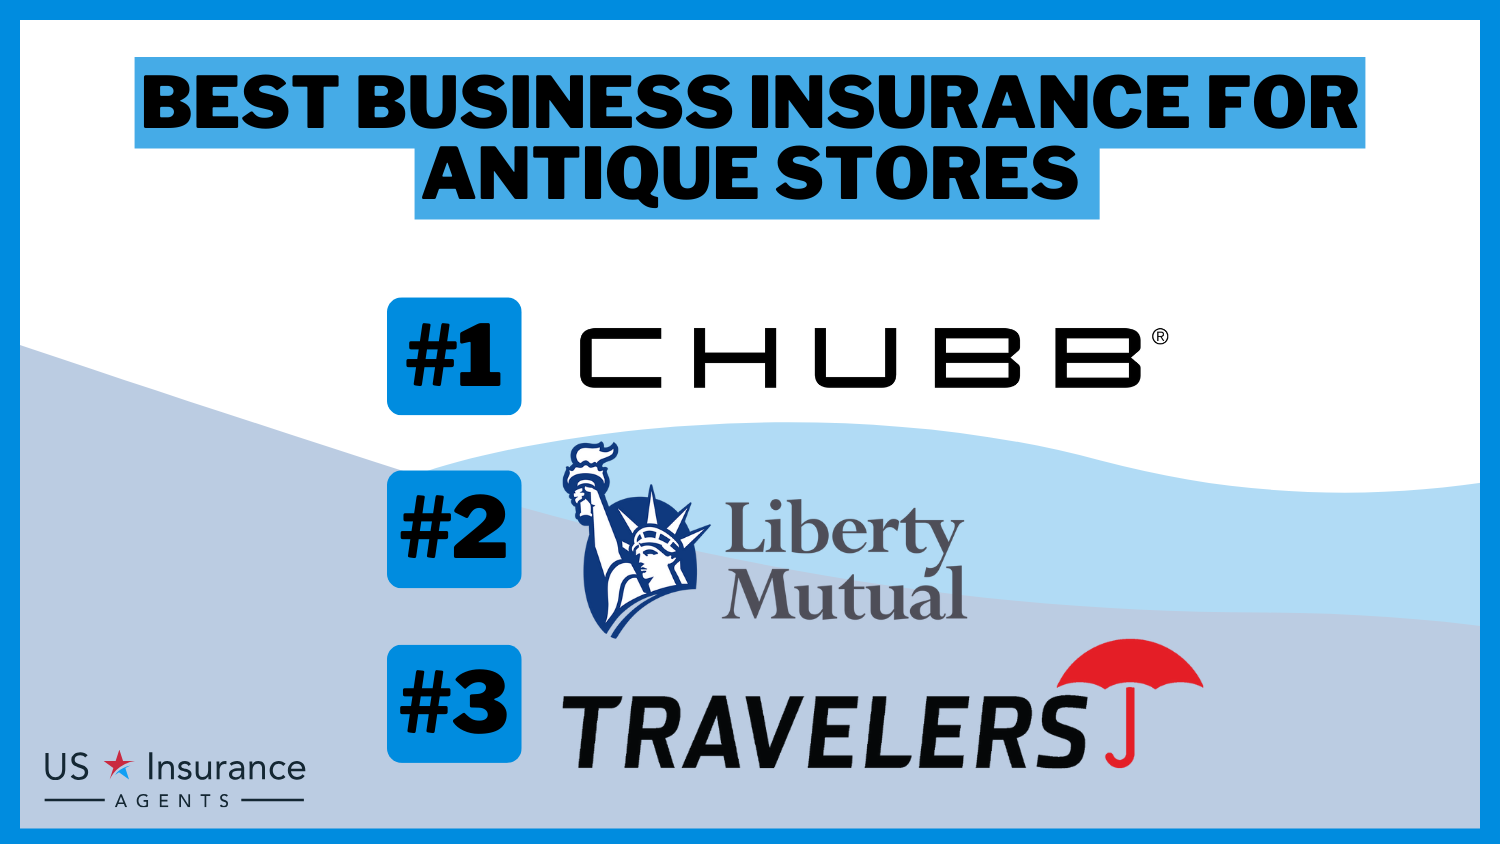 Best Business Insurance for Antique Stores: Chubb, Liberty Mutual and Travelers.